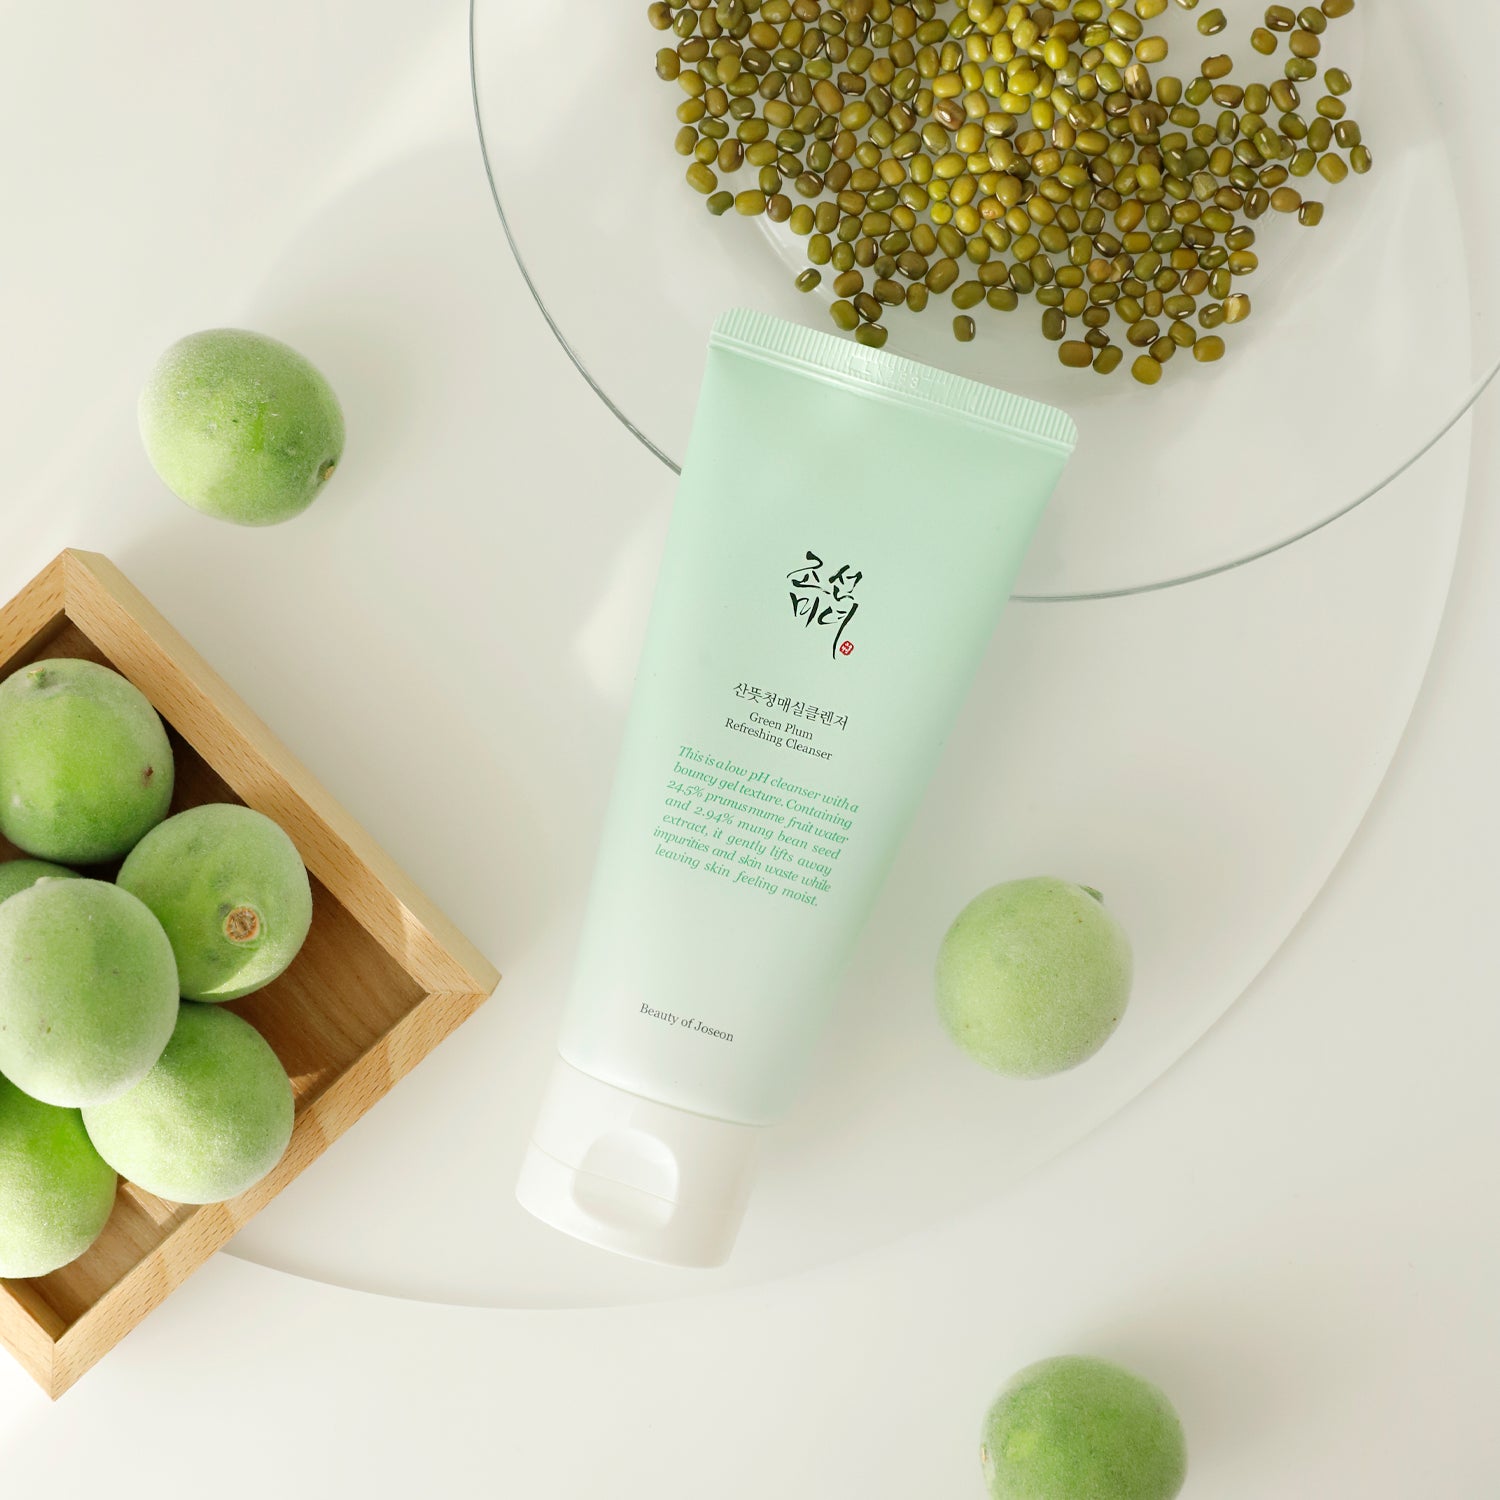 Refreshing Cleanser with green plum by Beauty Of Joseon (Beauty Of Joseon Green Plum Refreshing Cleanser)